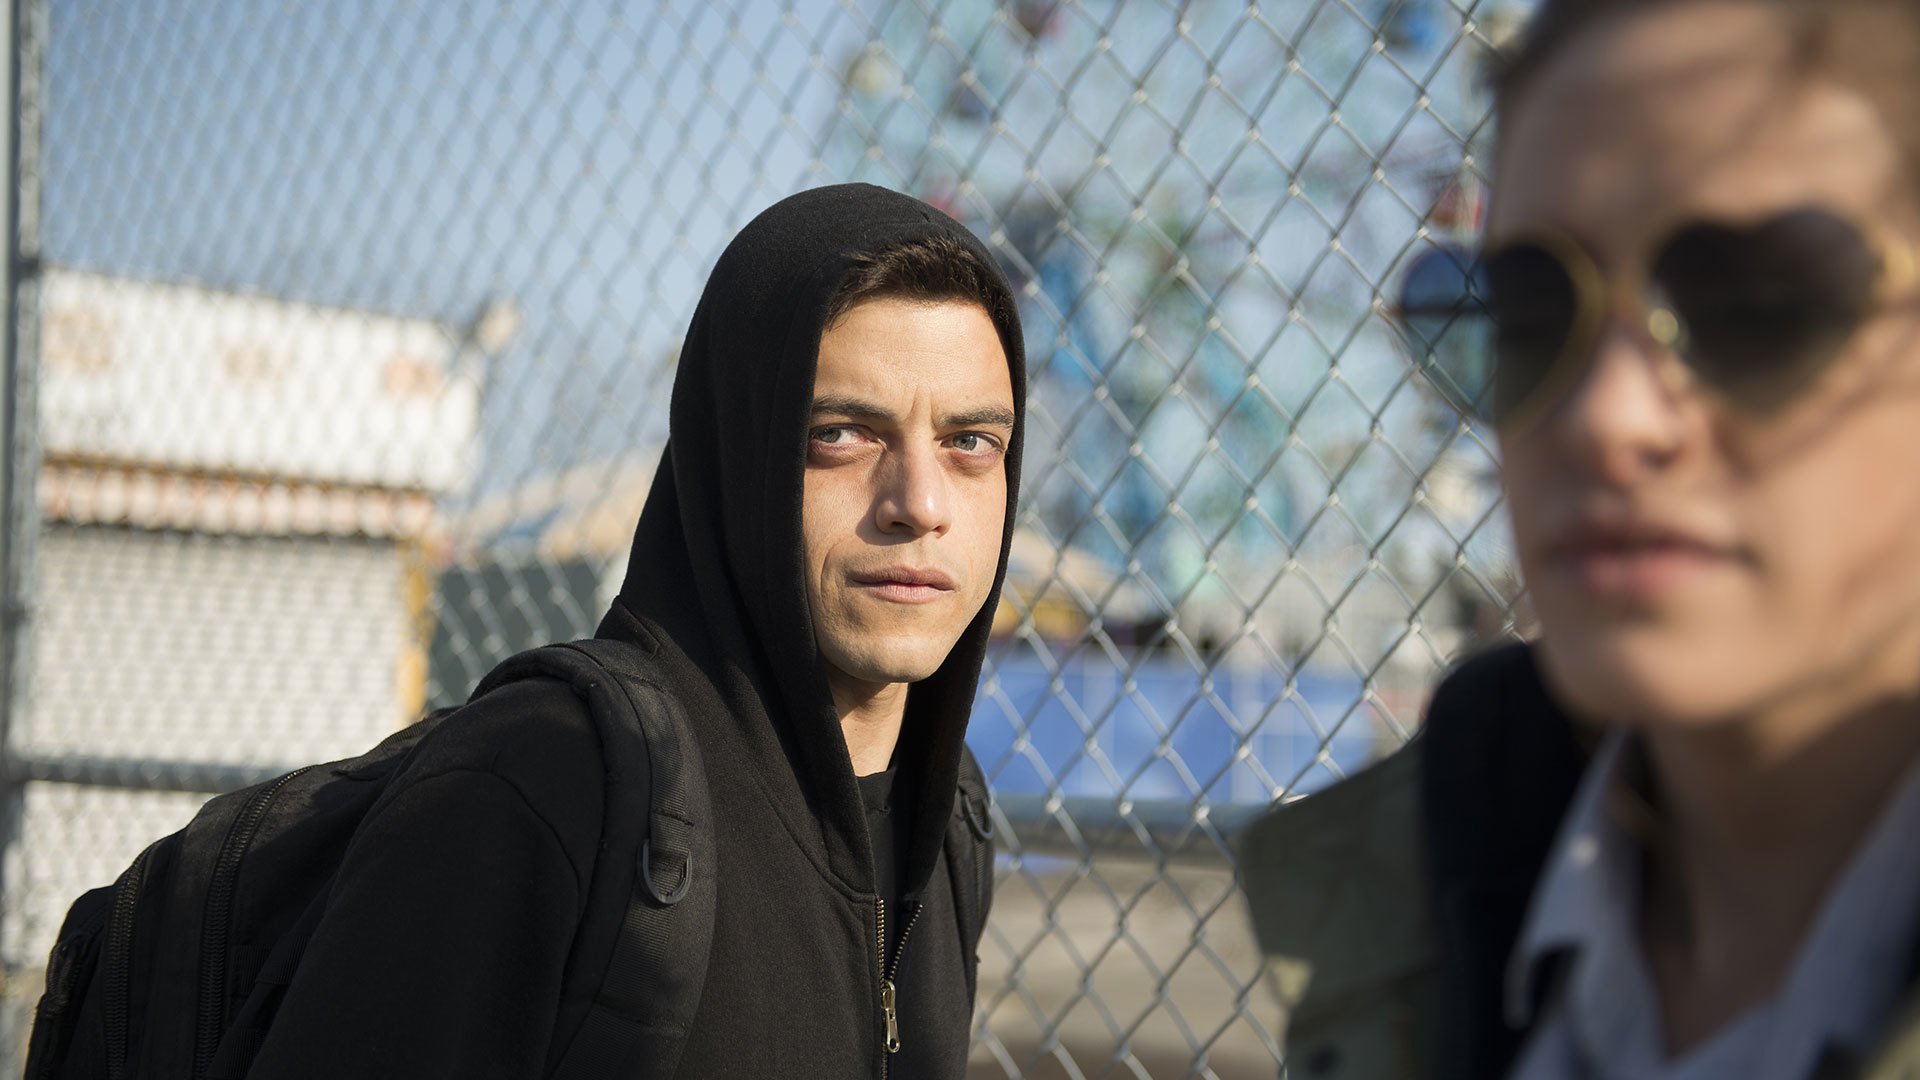 Mr. Robot Wallpapers, Pictures, Images